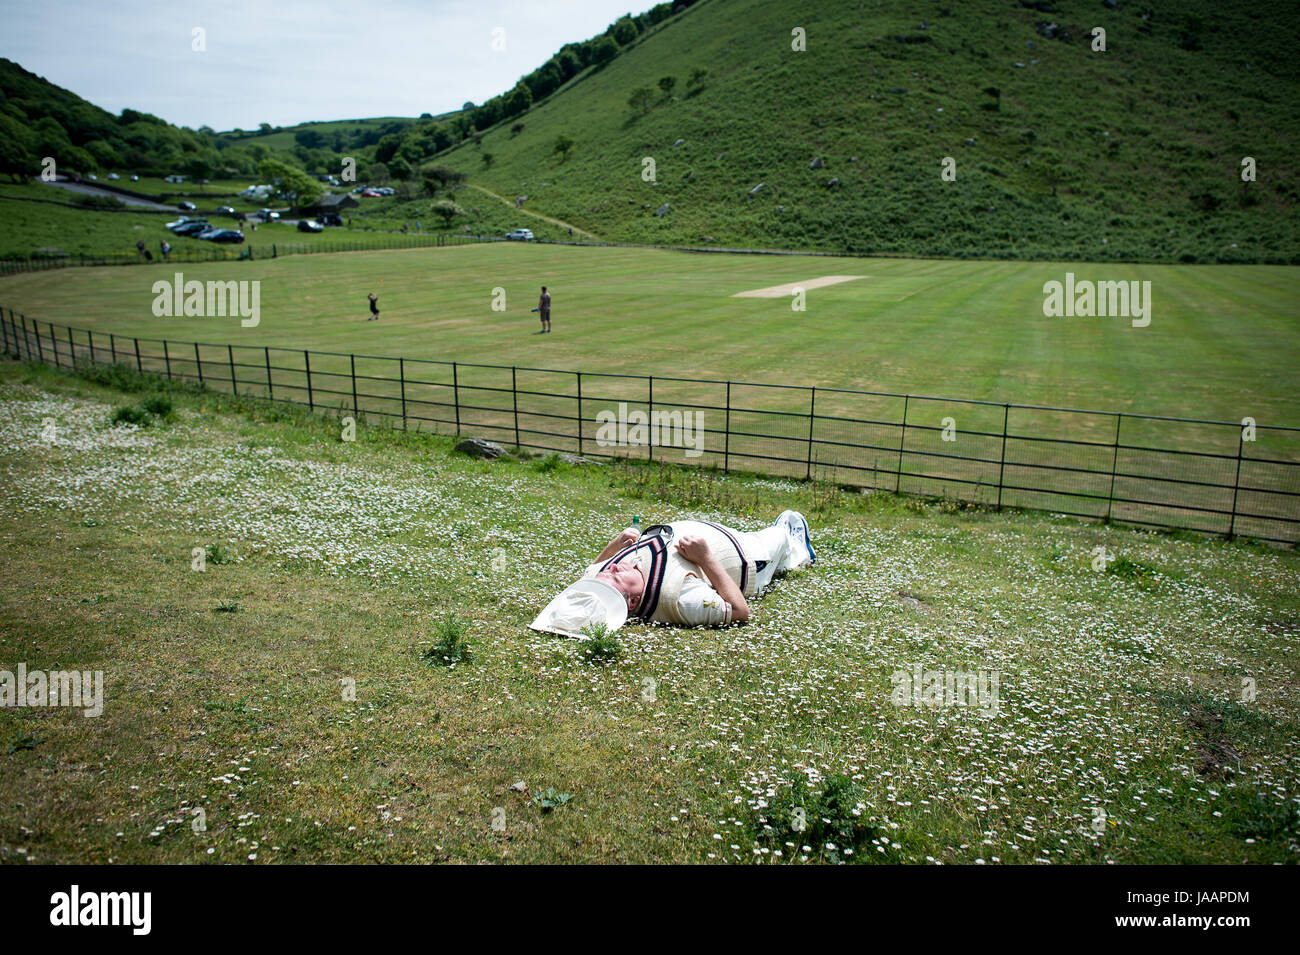 A player catches some sun before an annual friendly match between Cravens Cavaliers and Lynton & Lynmouth Cricket Club at their ground based inside the Valley of Rocks, North Devon. Stock Photo